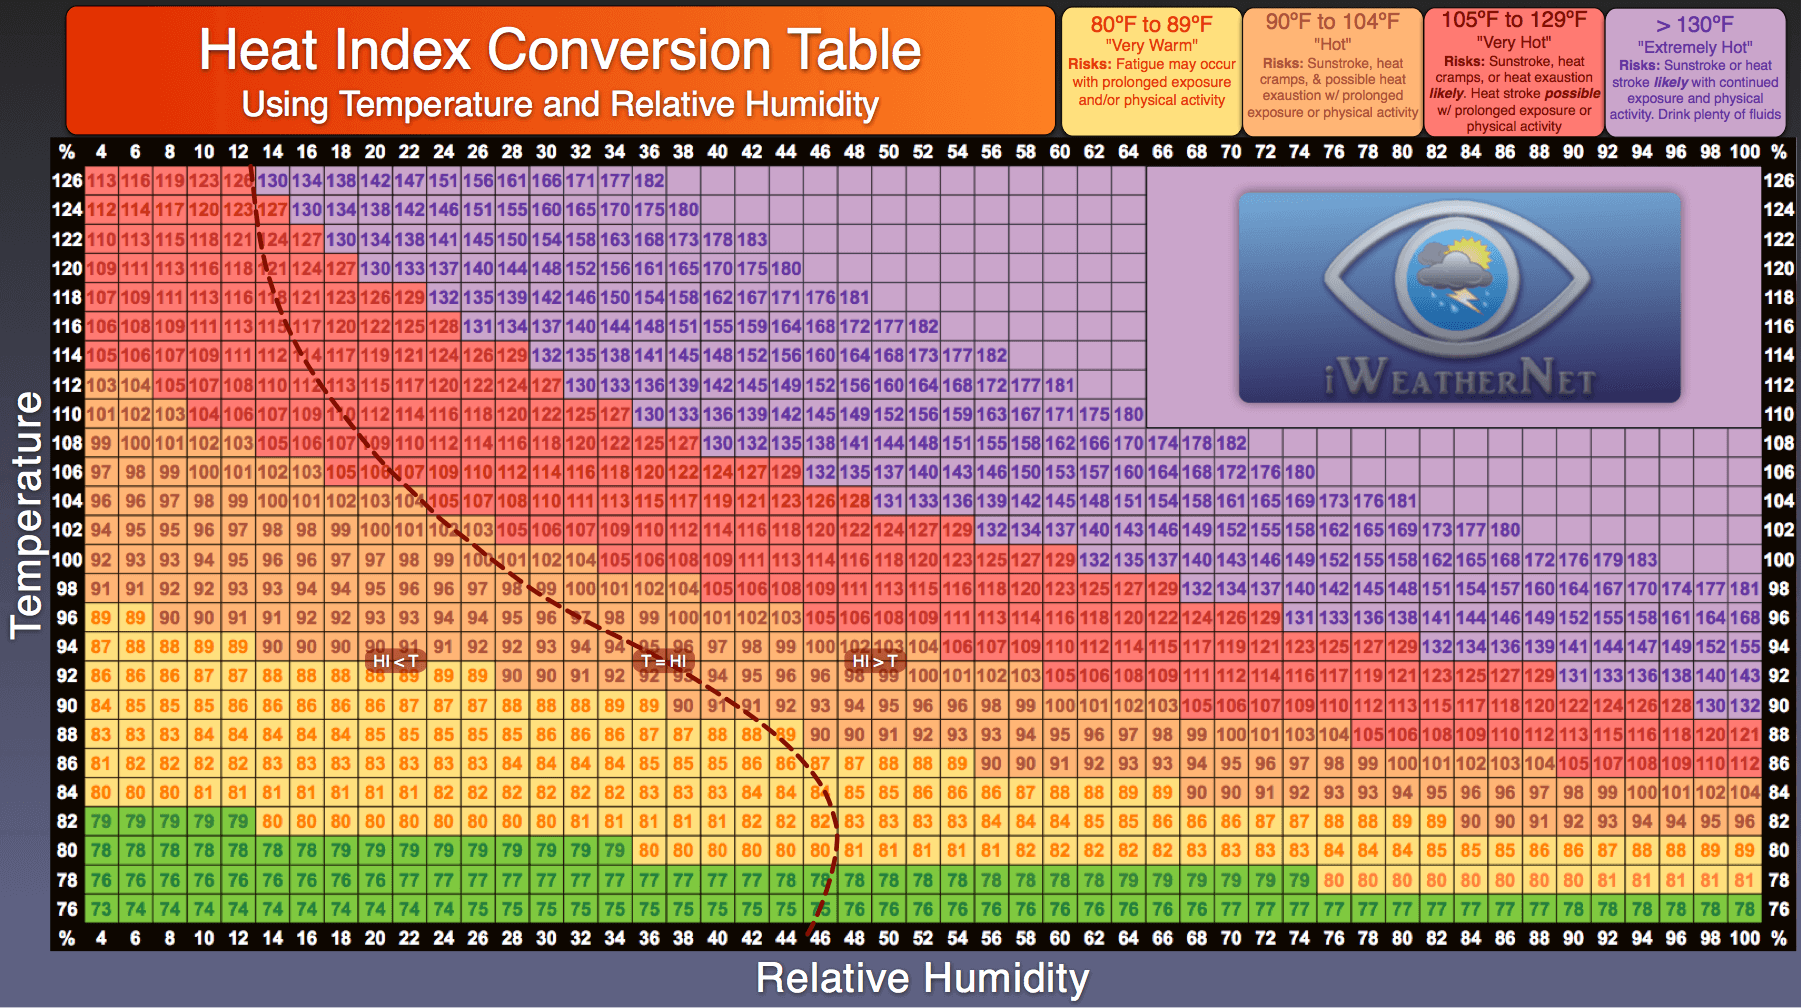 https://www.iweathernet.com/wxnetcms/wp-content/uploads/2015/07/heat-index-chart-relative-humidity-2.png